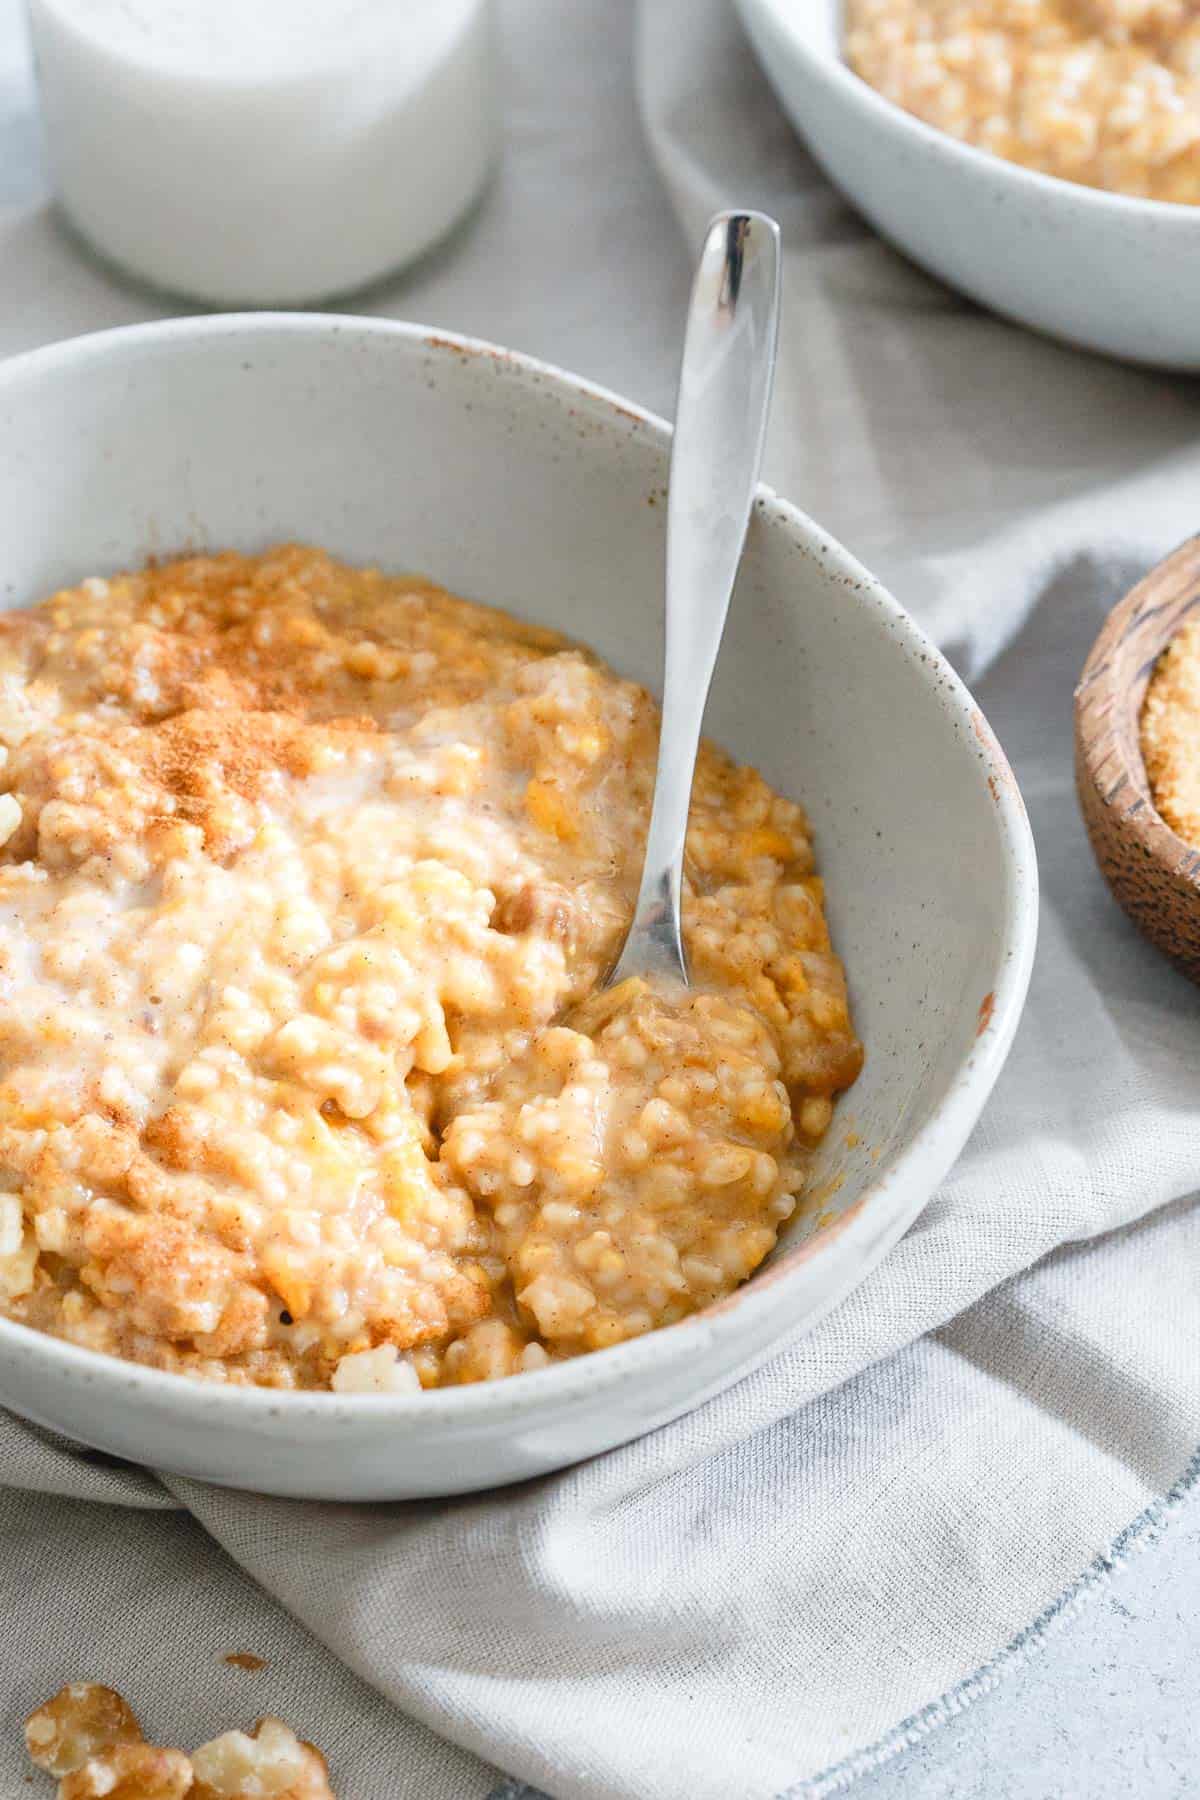 Start your day with this creamy bowl of sweet potato steel cut oats. Set the Instant Pot (or pressure cooker) up the night before and wake up to a bowl of this for breakfast!